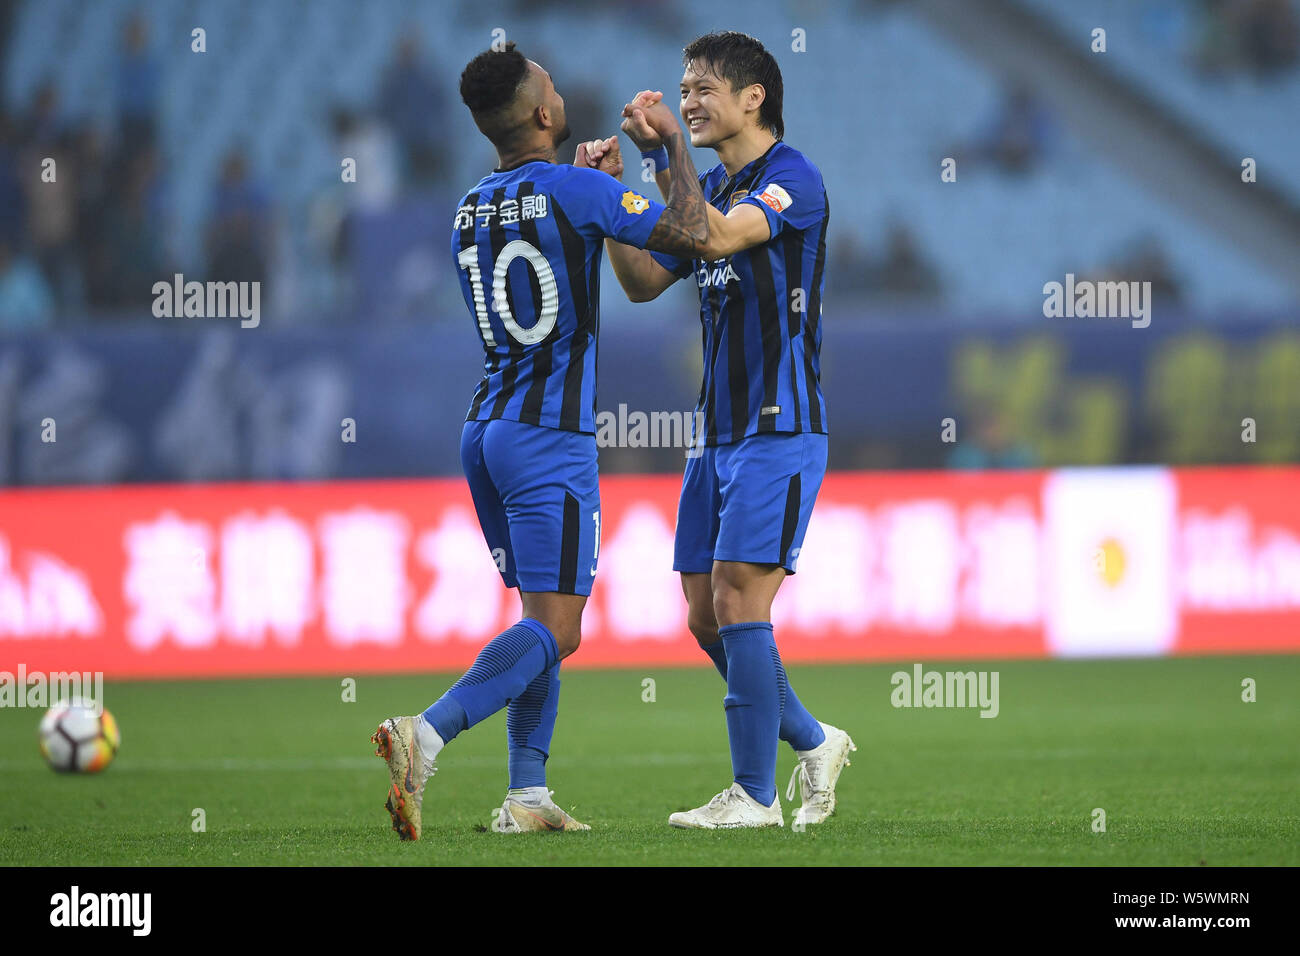 Brazilian football player Alex Teixeira, left, and Wang Song of Jiangsu Suning celebrate after scoring a goal against Henan Jianye in their 30th round Stock Photo